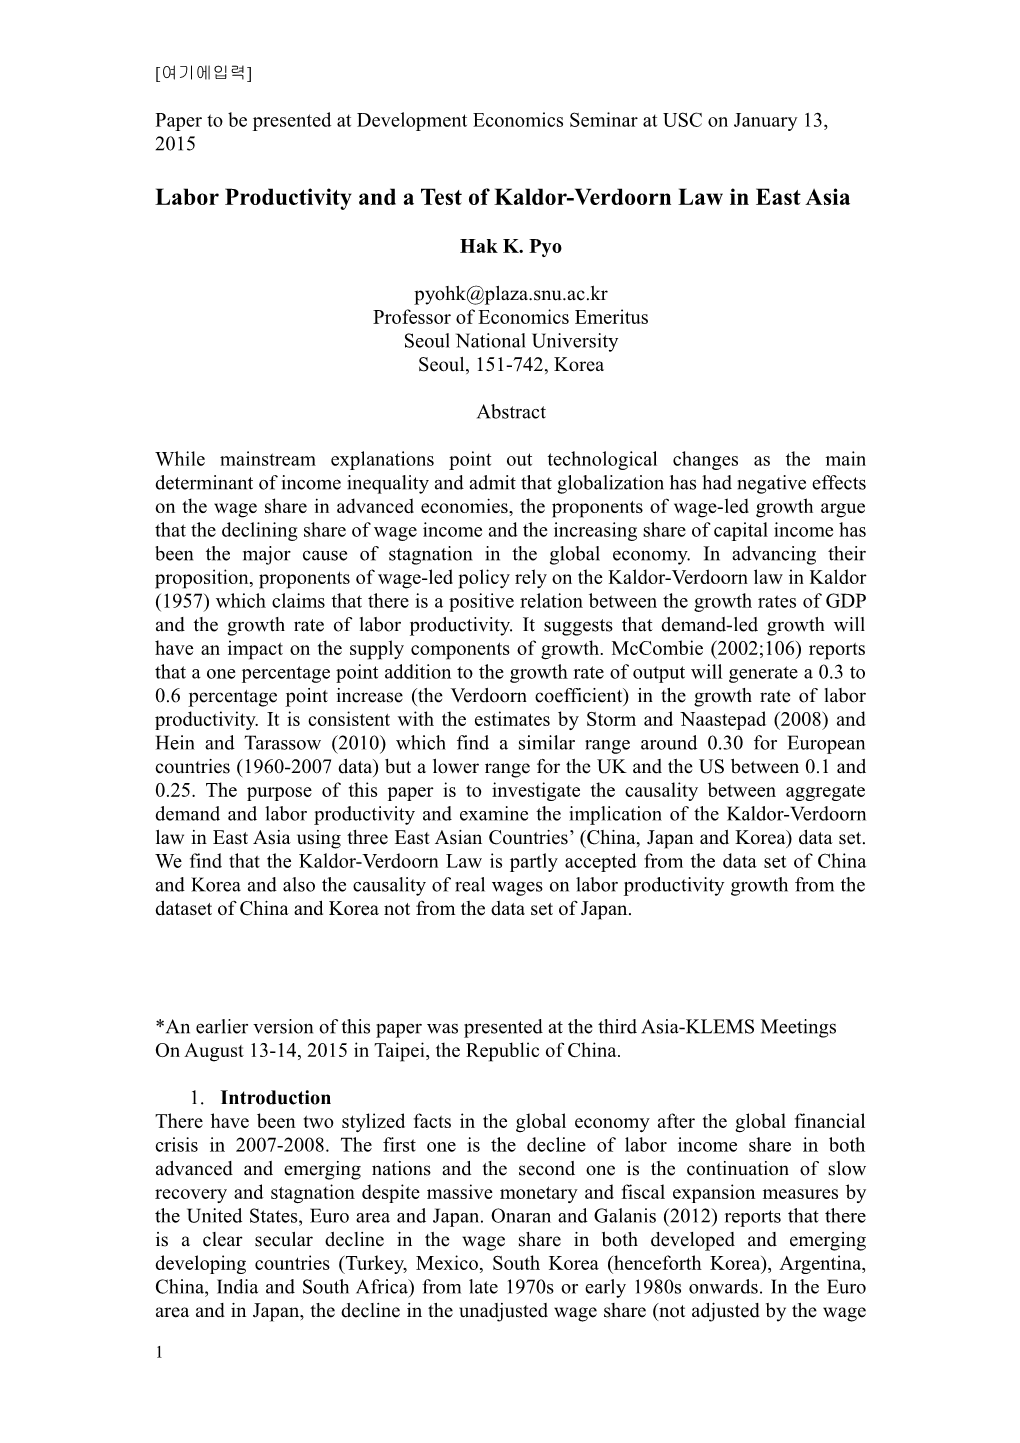 Labor Productivity and a Test of Kaldor-Verdoorn Law in East Asia